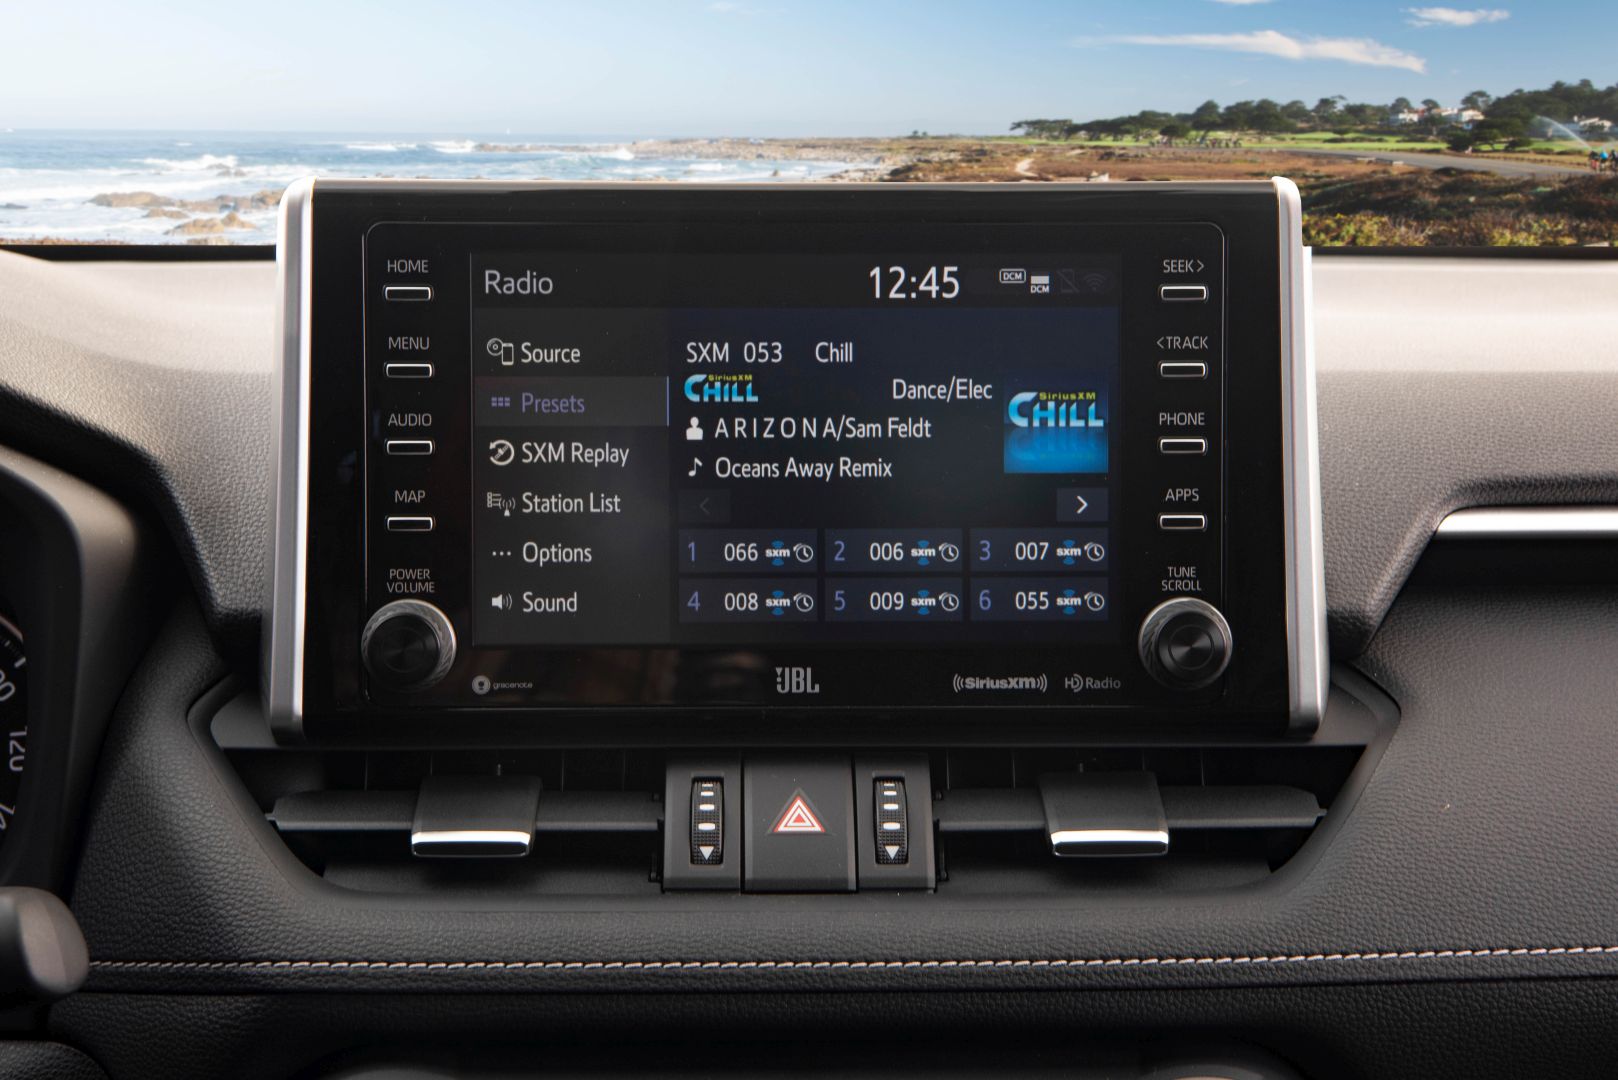 Toyota Dealers Begin Enabling Android Auto on Select Models - autoevolution